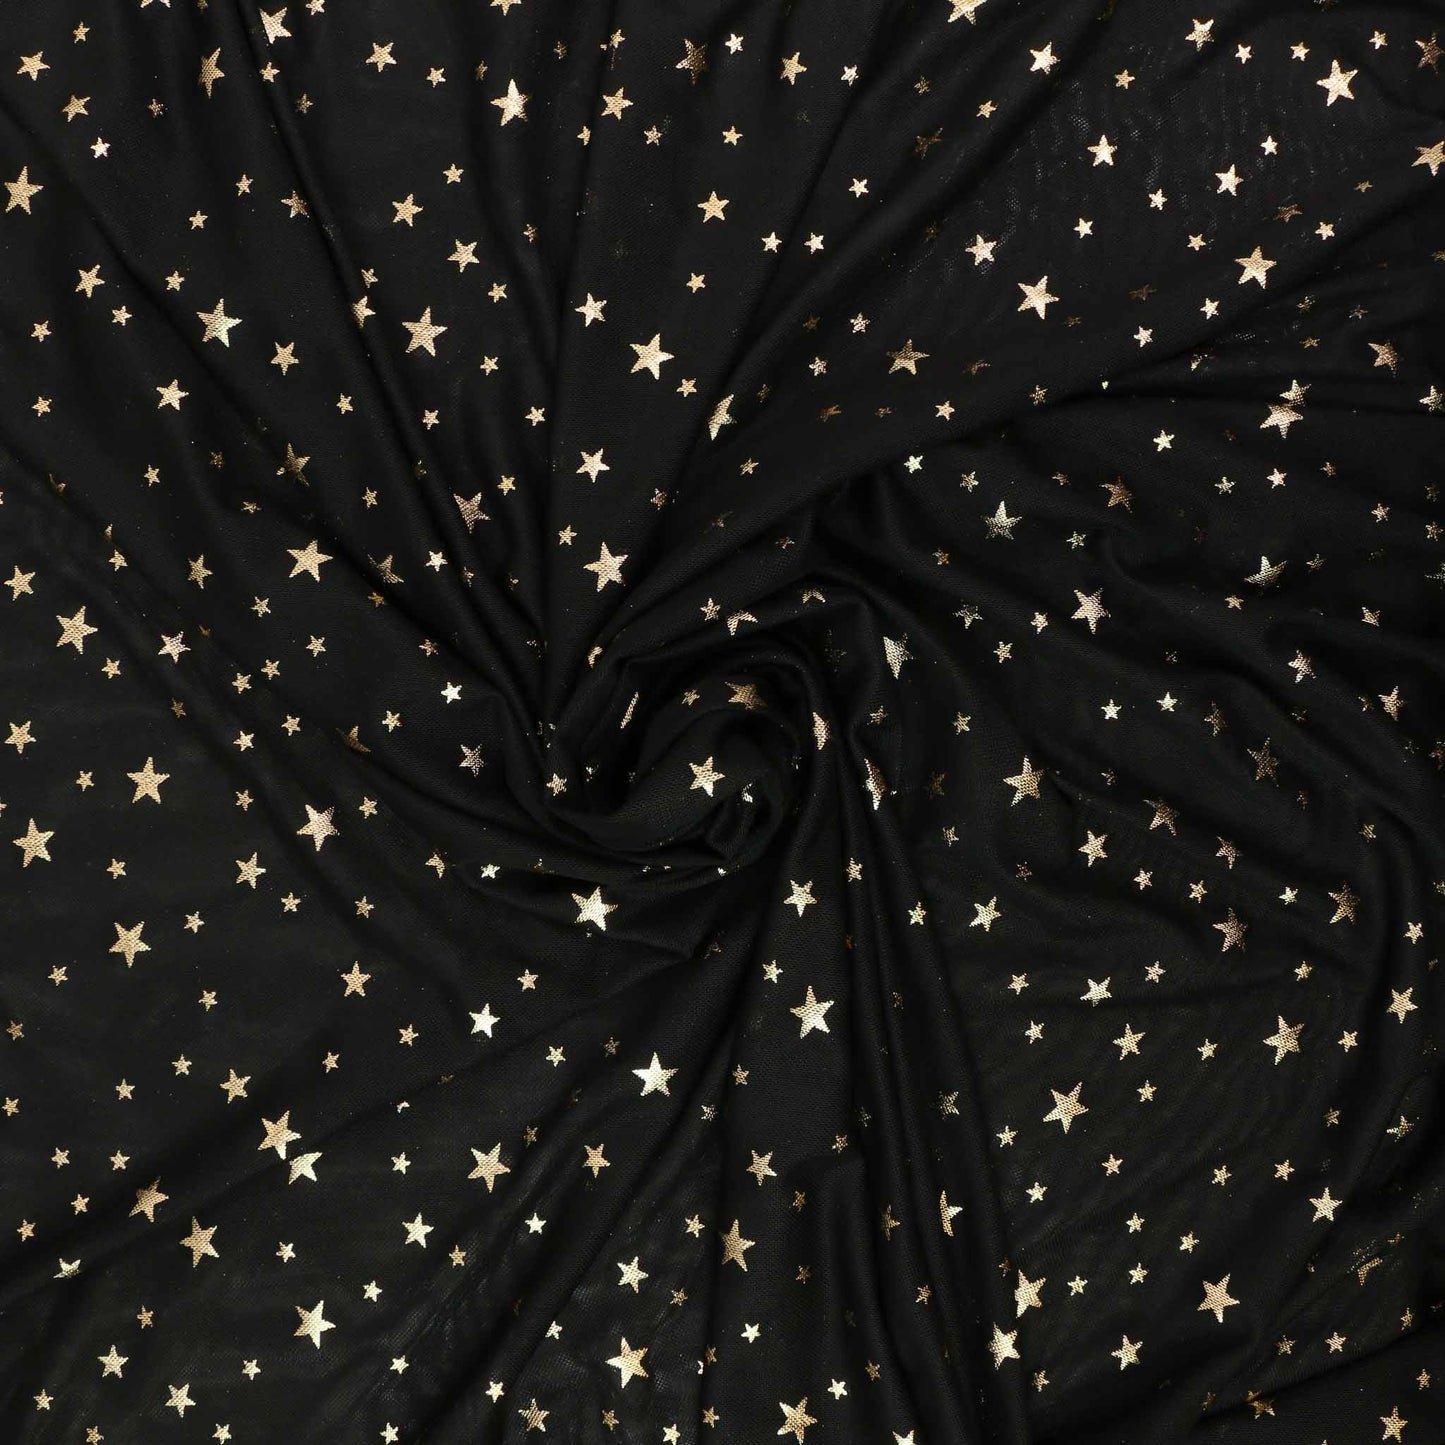 Power Mesh Fabric - Black and gold